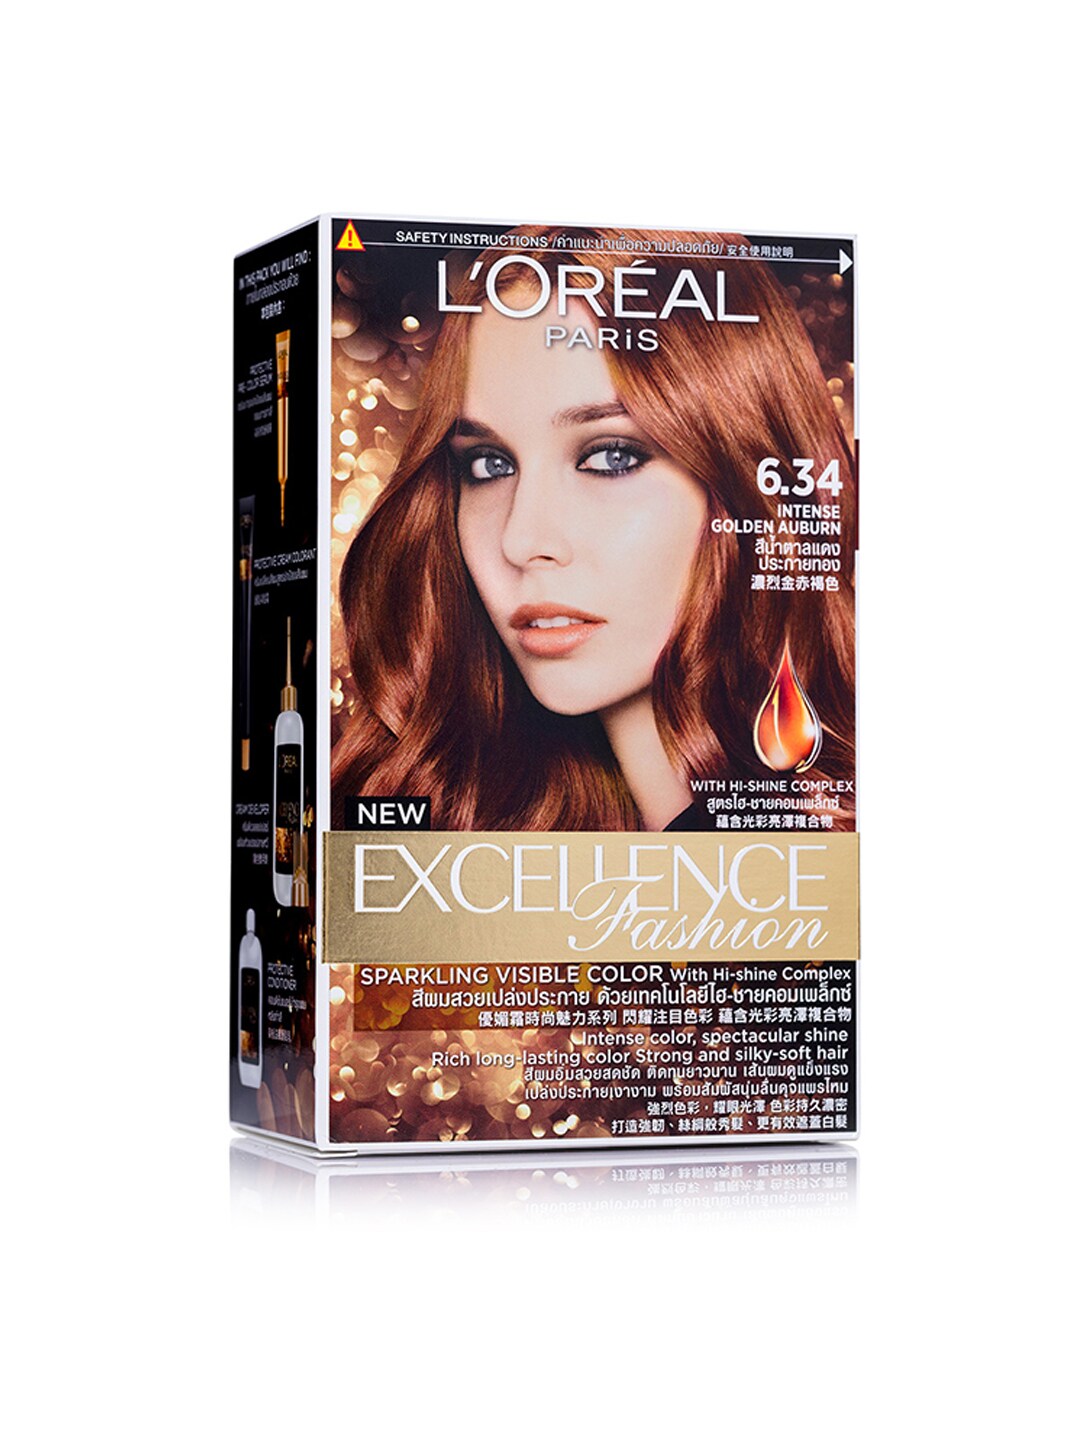 LOreal Paris Excellence Fashion Hair Color - Intense Golden Auburn 6.34 Price in India